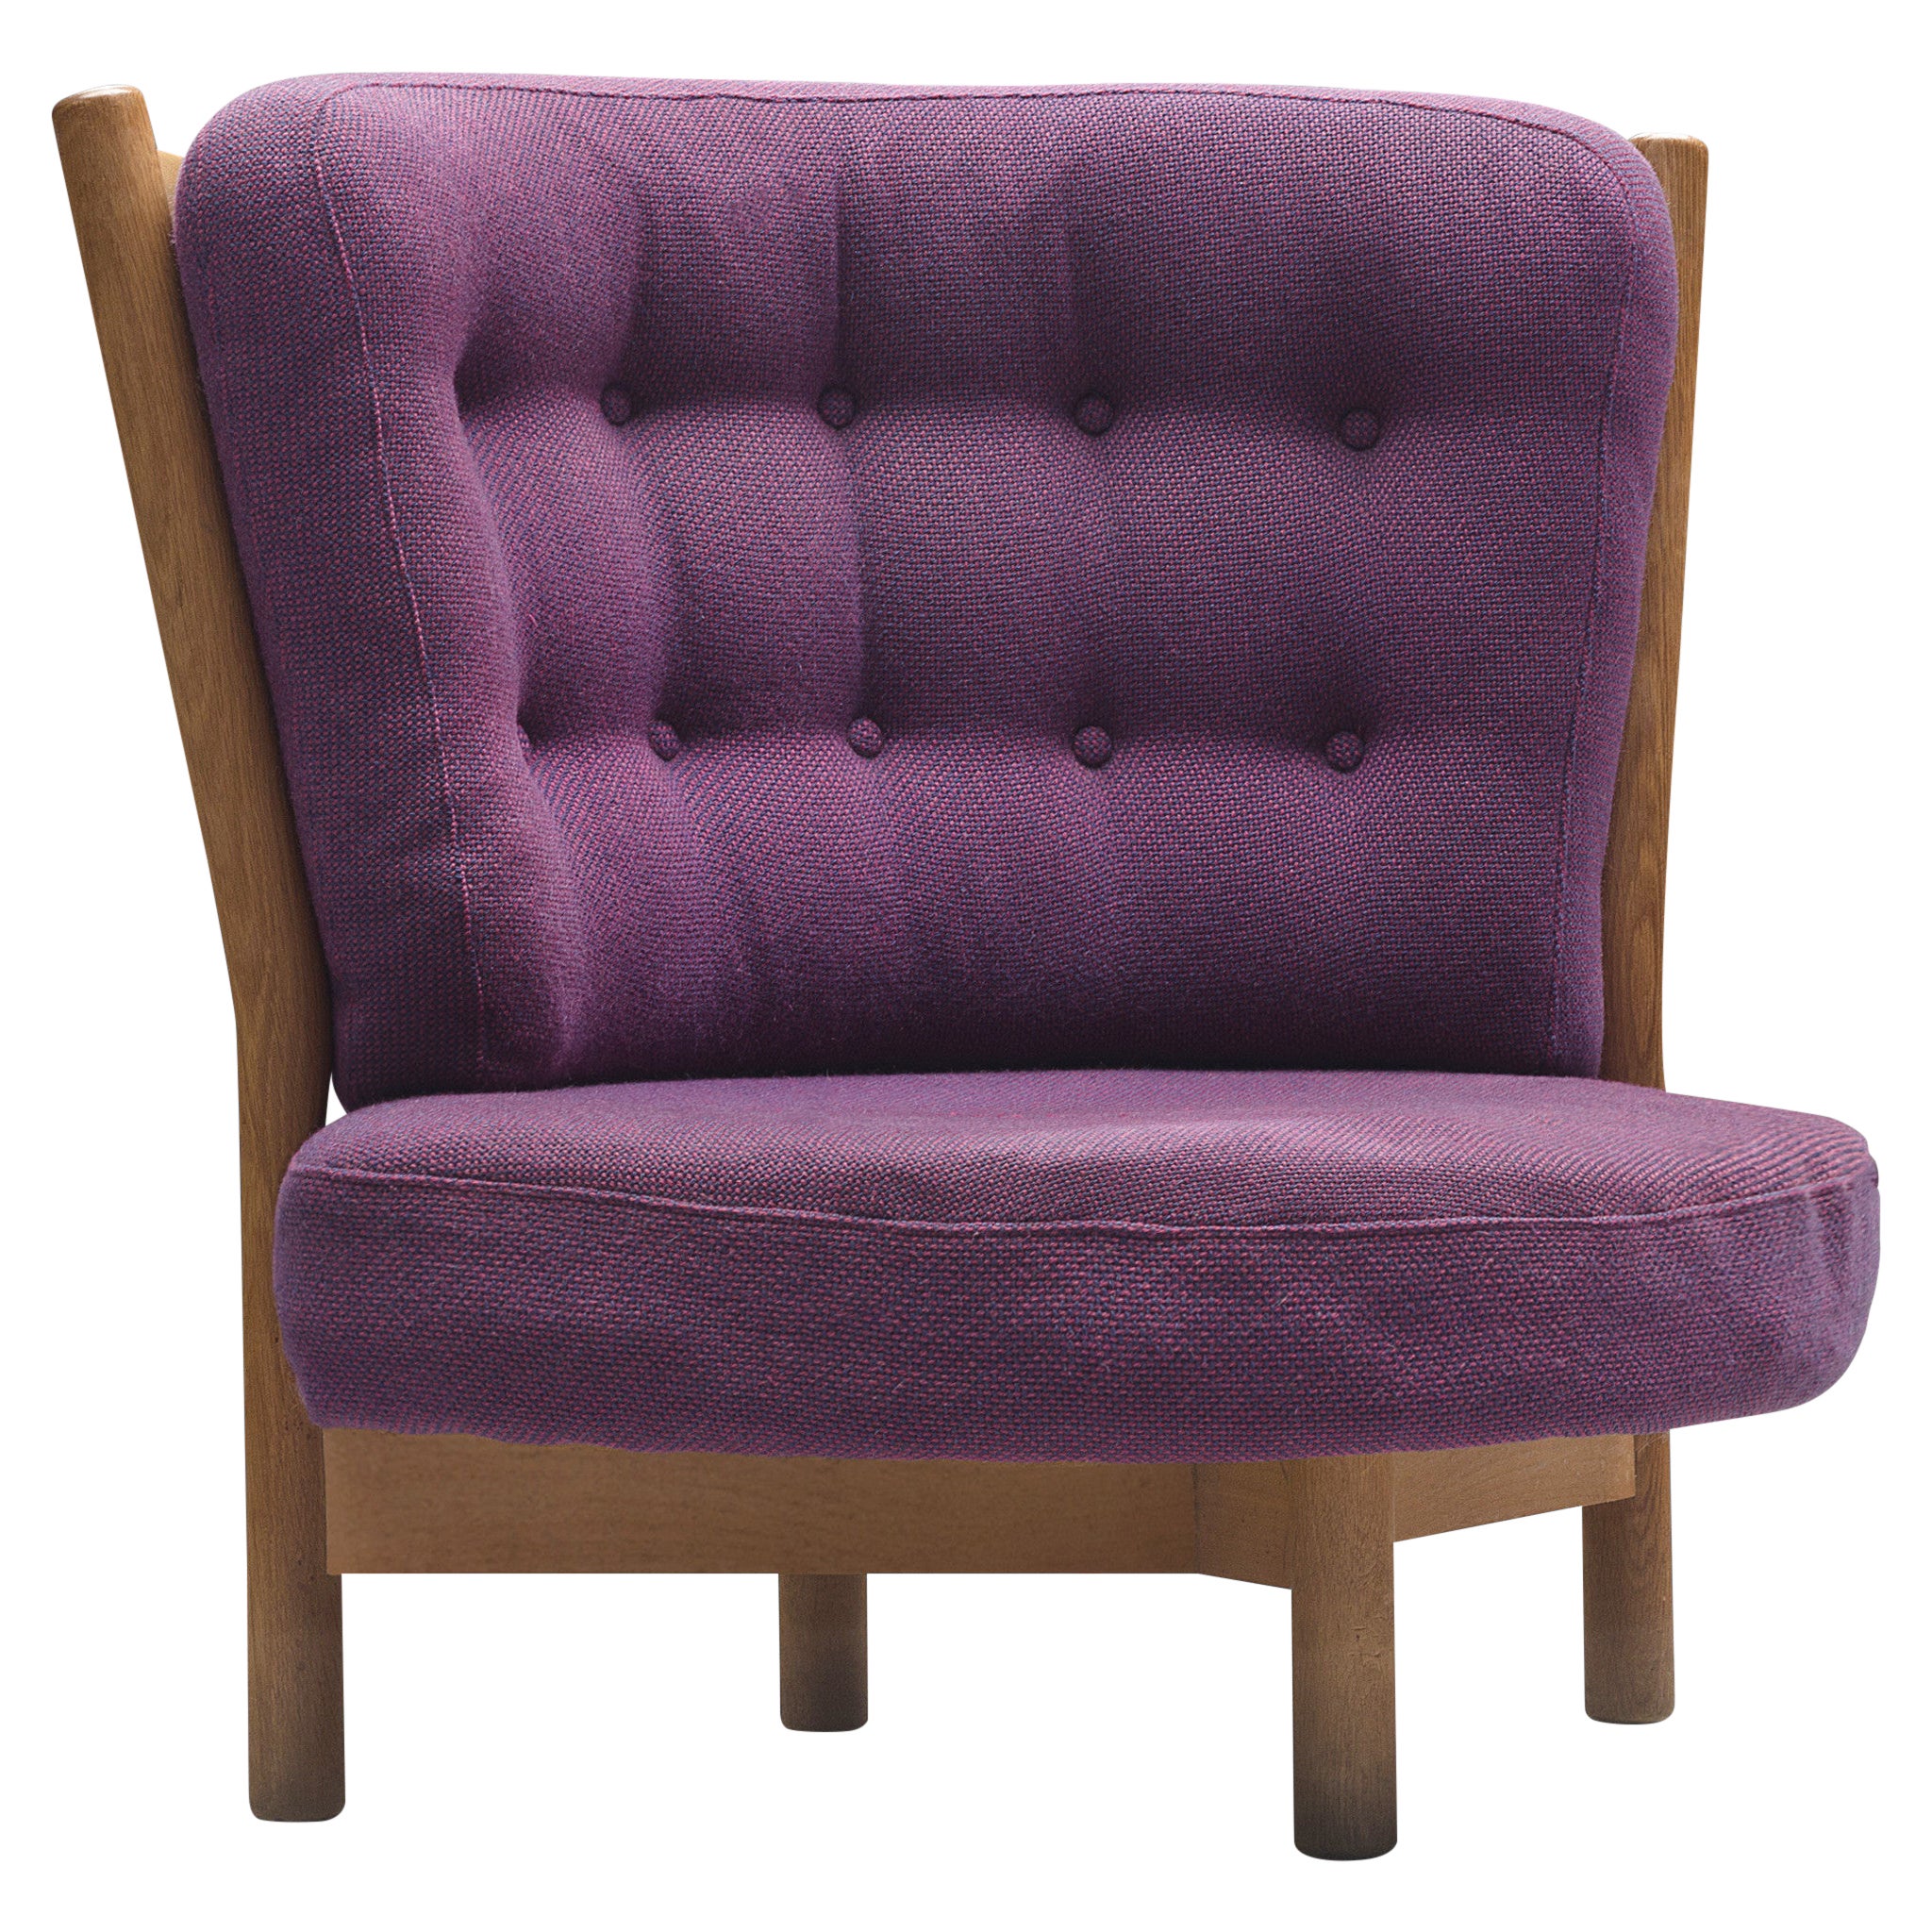 Guillerme & Chambron Lounge Chair in Purple Upholstery For Sale